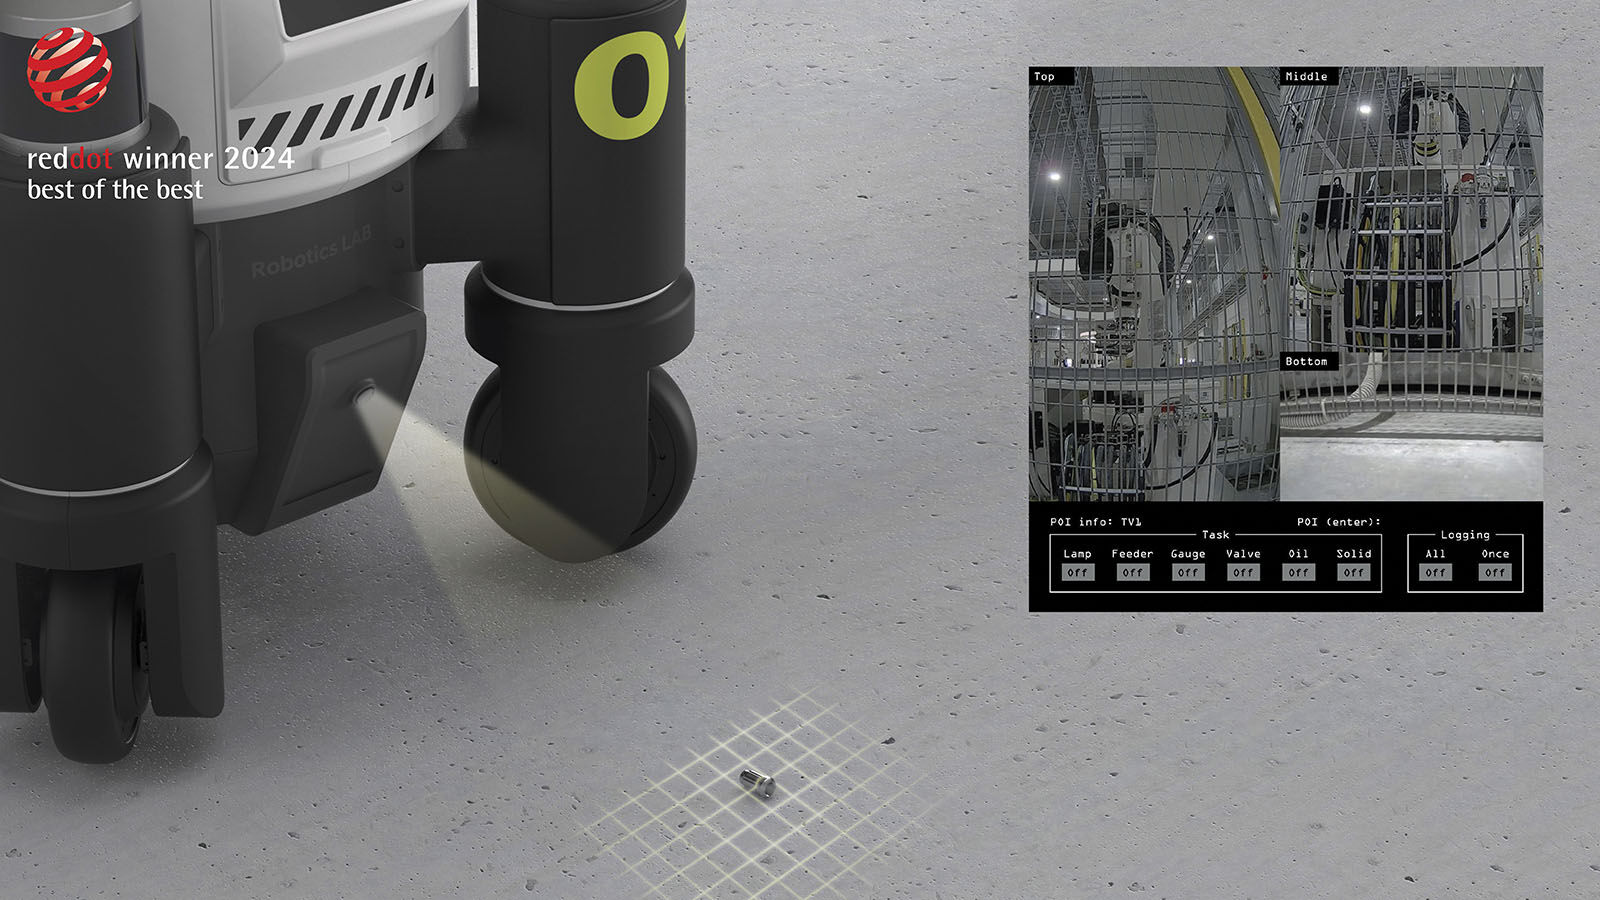 Safety Inspection Robot